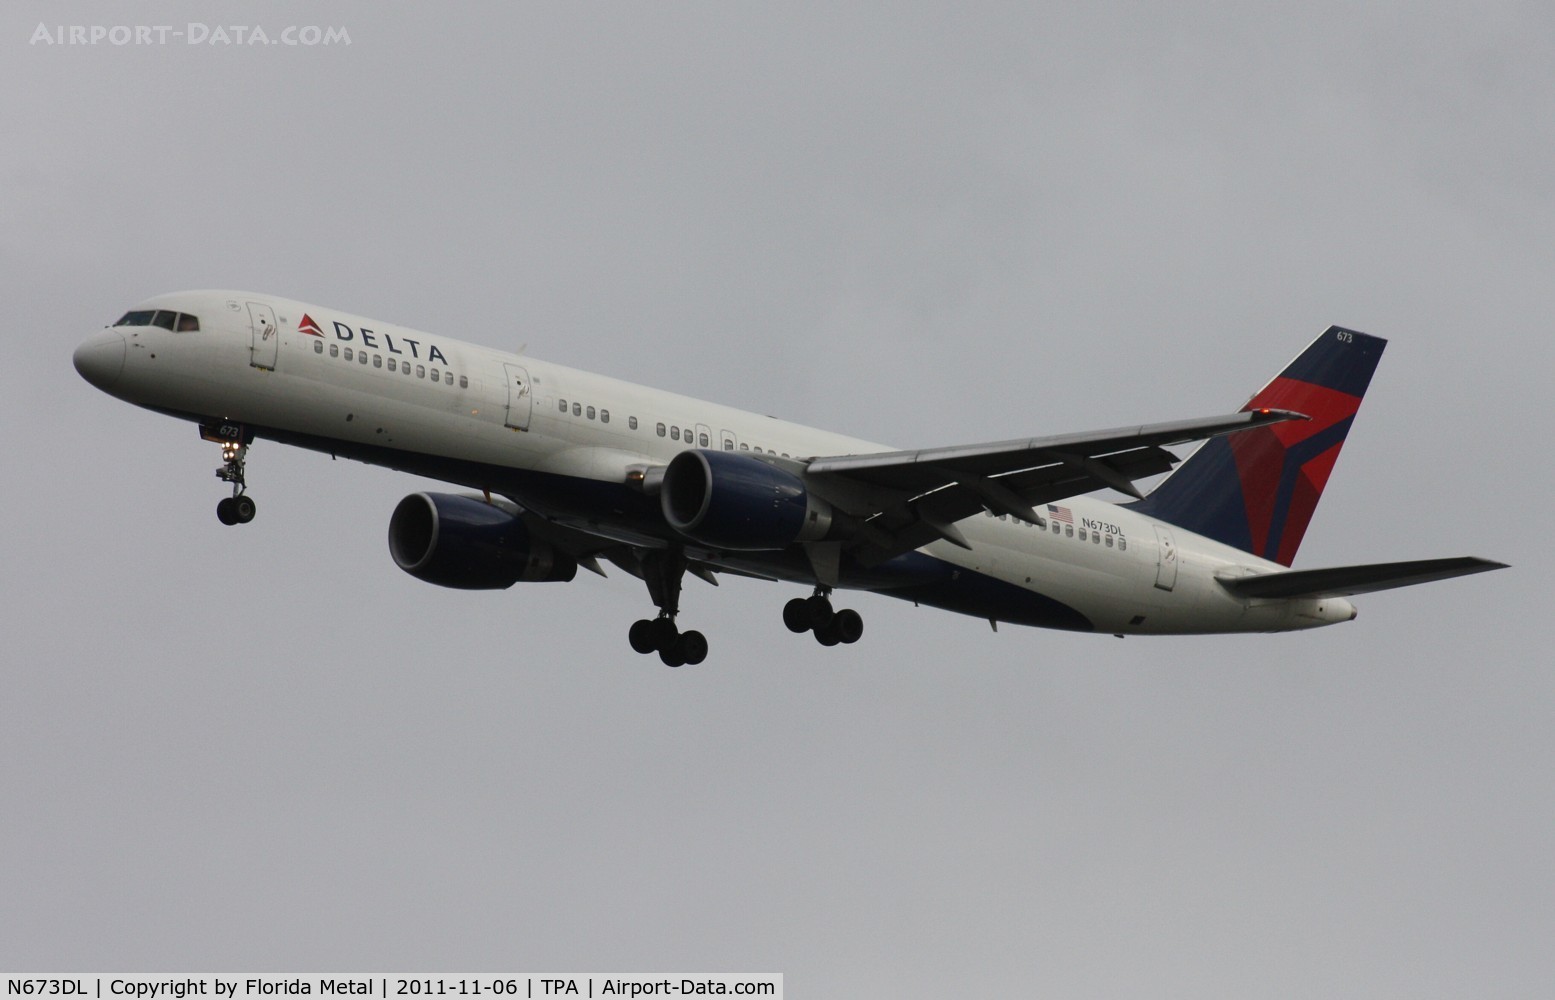 N673DL, 1992 Boeing 757-232 C/N 25978, Delta 757 doing Kai Tak style approach at TPA due to nearby MacDill Air Show